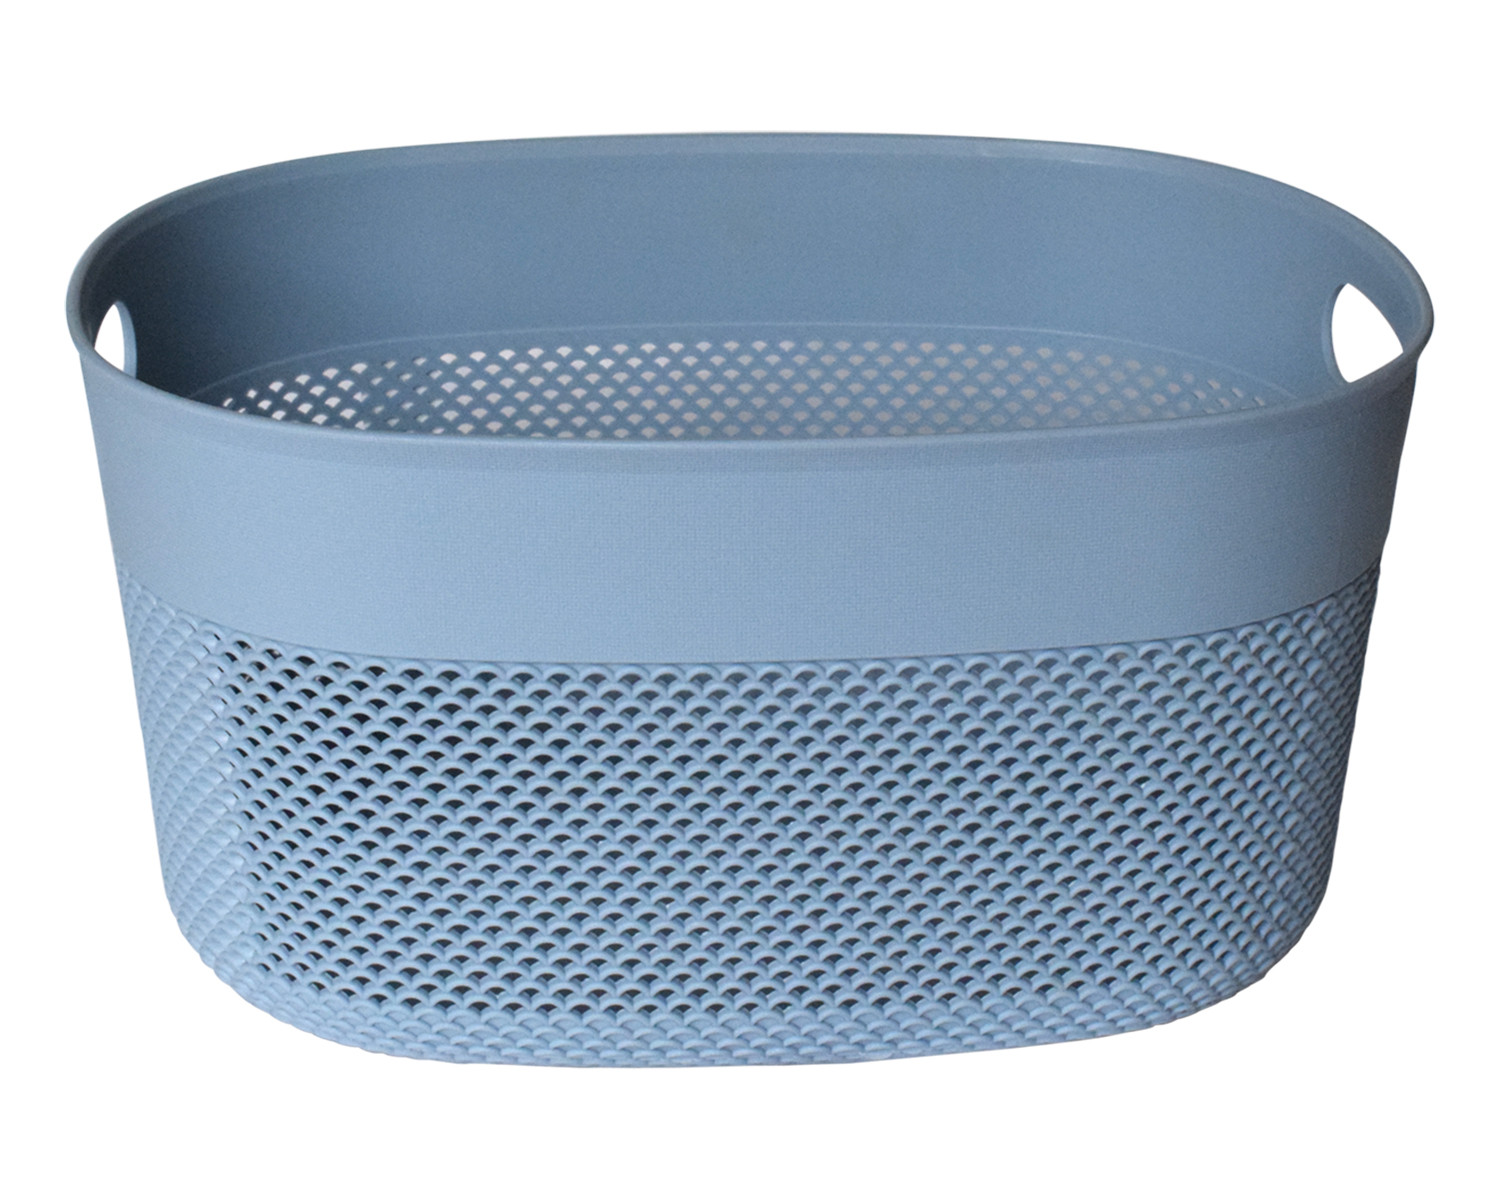 Kuber Industries Unbreakable  Medium Multipurpose Storage Baskets with lid|Design-Netted|Material-Plastic|Shape-Oval|Color-Sky Blue